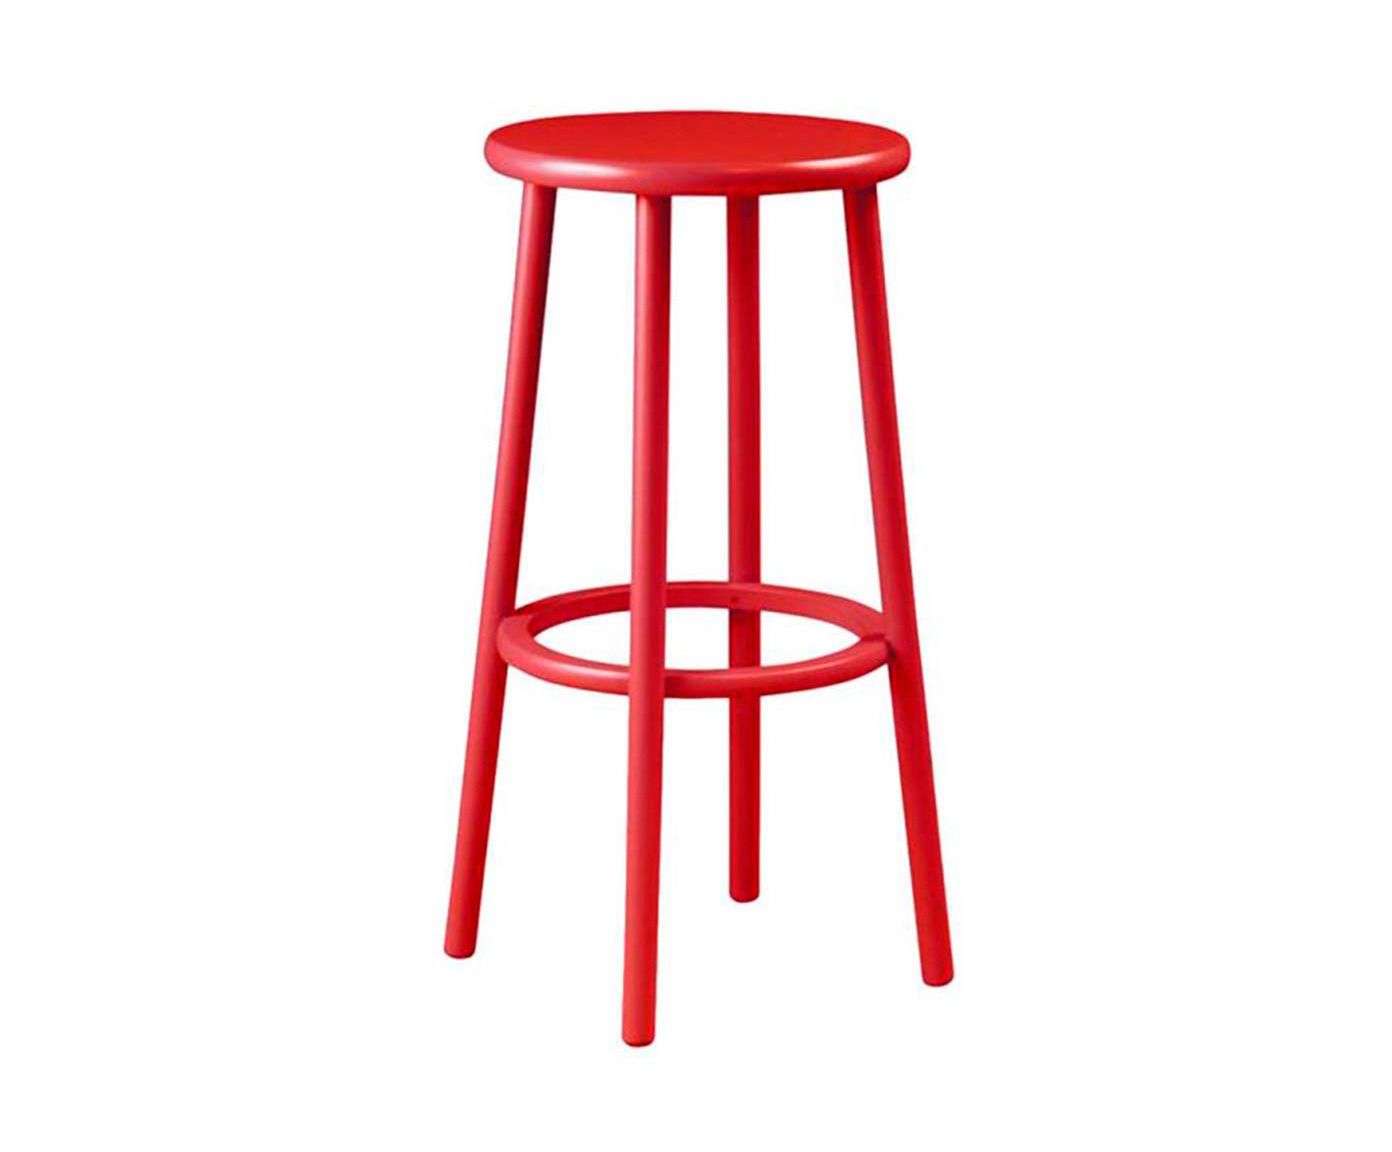 Banqueta milano rouge - 72x35cm | Westwing.com.br